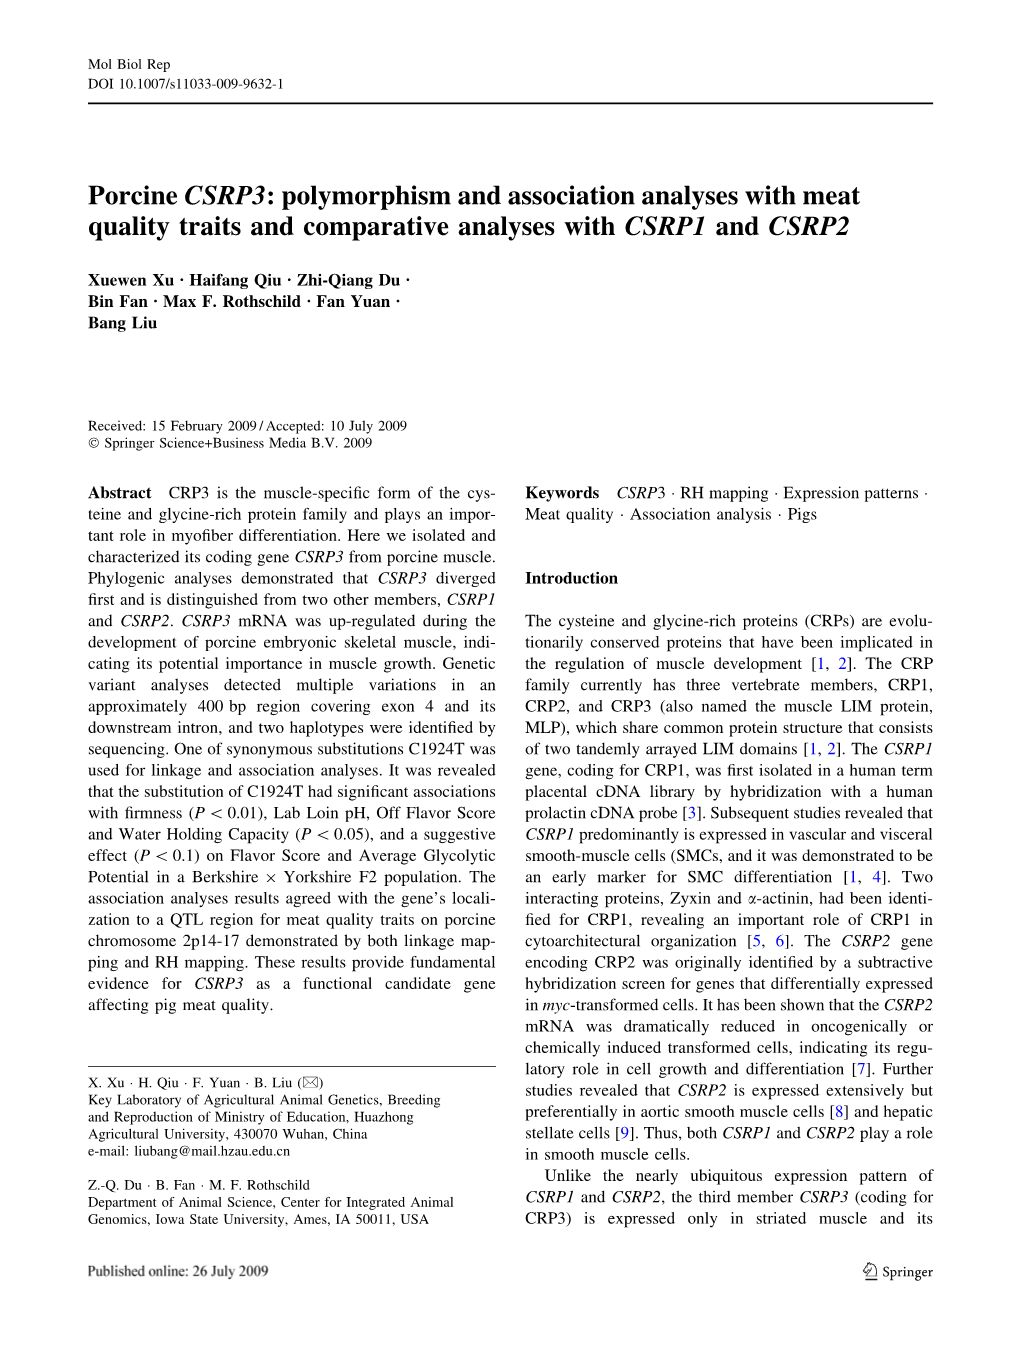 Porcine CSRP3: Polymorphism and Association Analyses with Meat Quality Traits and Comparative Analyses with CSRP1 and CSRP2